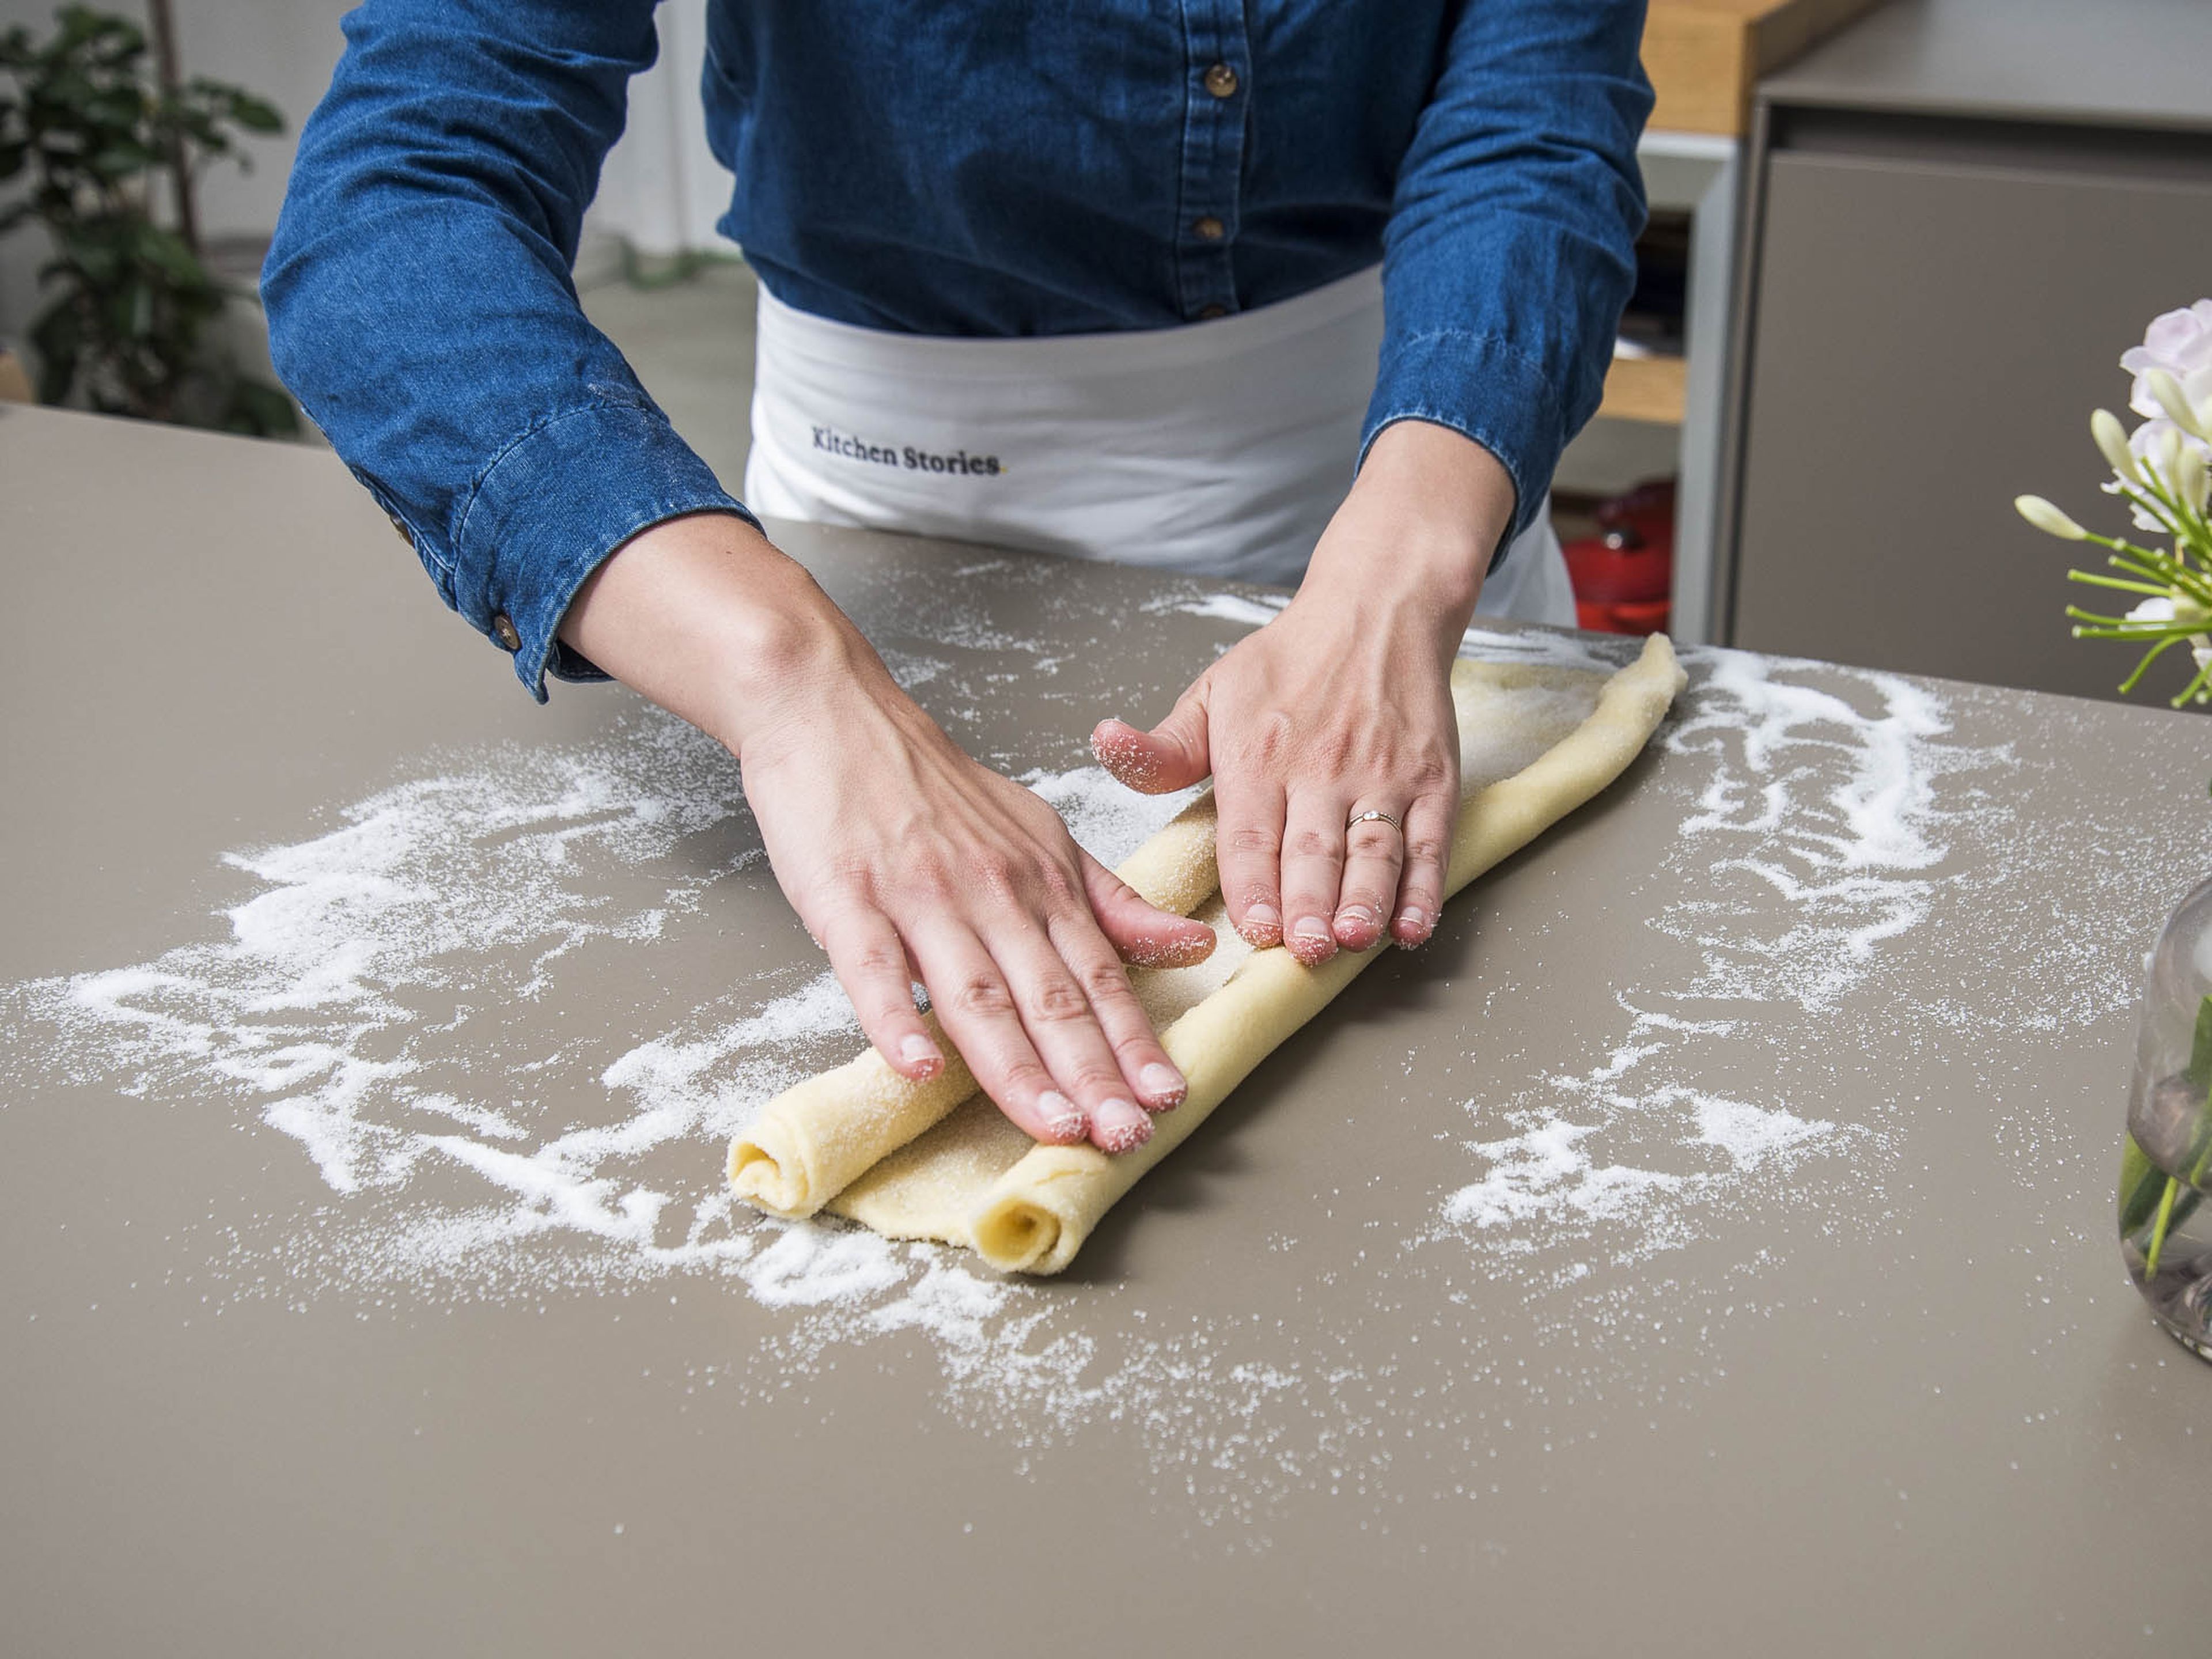 Starting from the long side, roll the dough up tightly like a carpet, stopping halfway. Repeat from the other side so that the two rolls meet. Carefully press the dough together along the seam to seal, then wrap in plastic and chill for approx. 30 min.